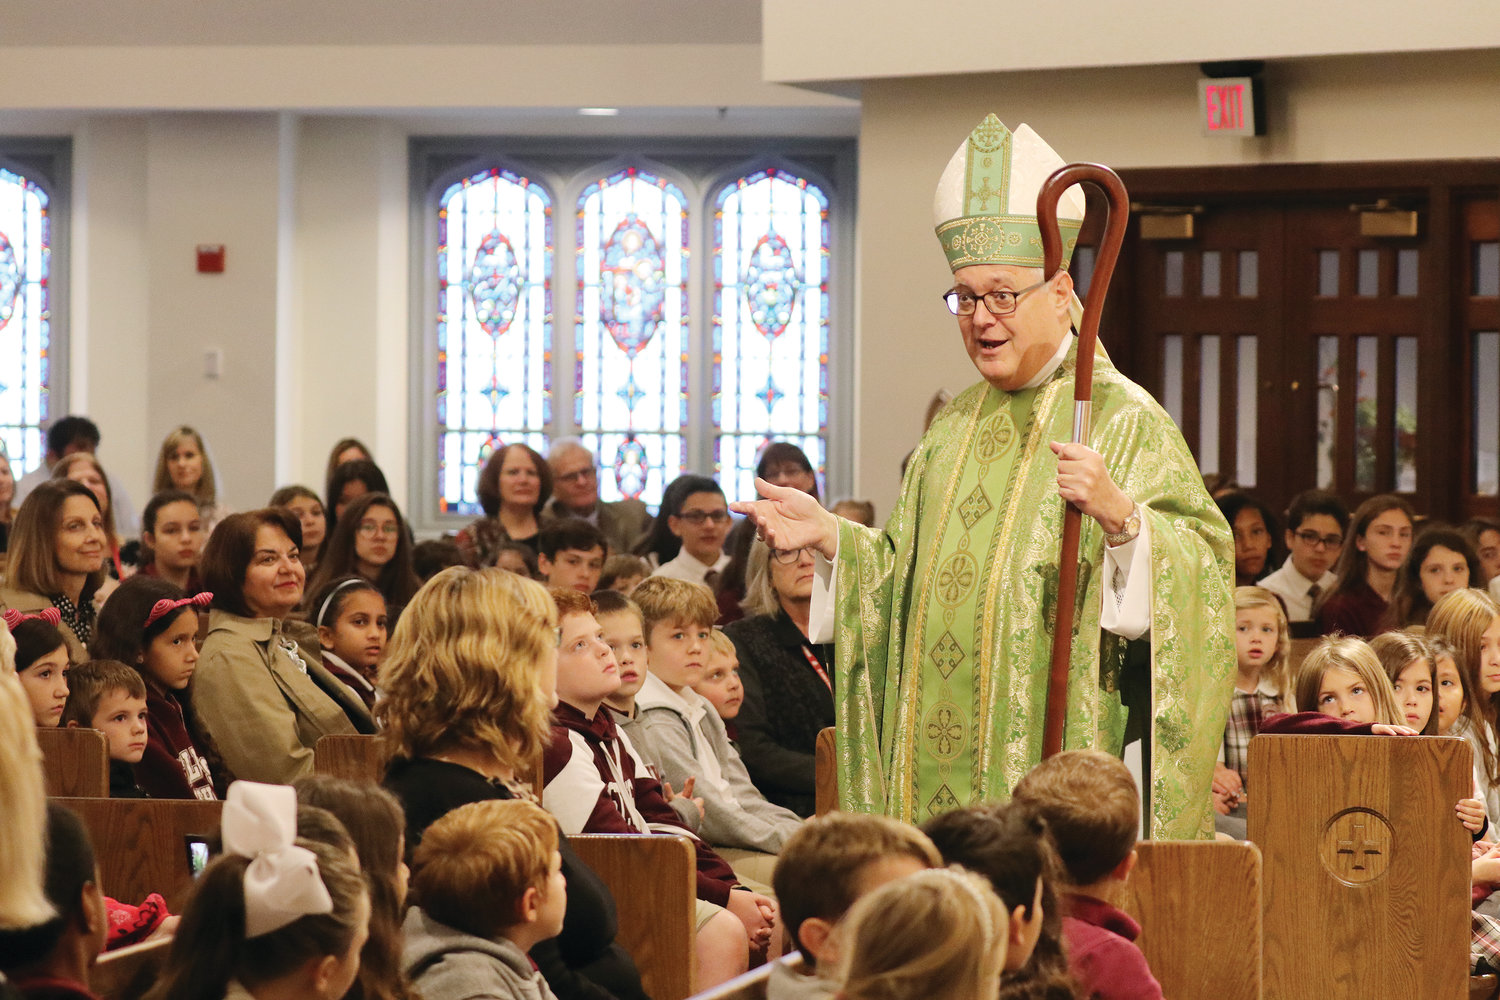 Bishop Thomas J. Tobin delivers the homily at Mass.